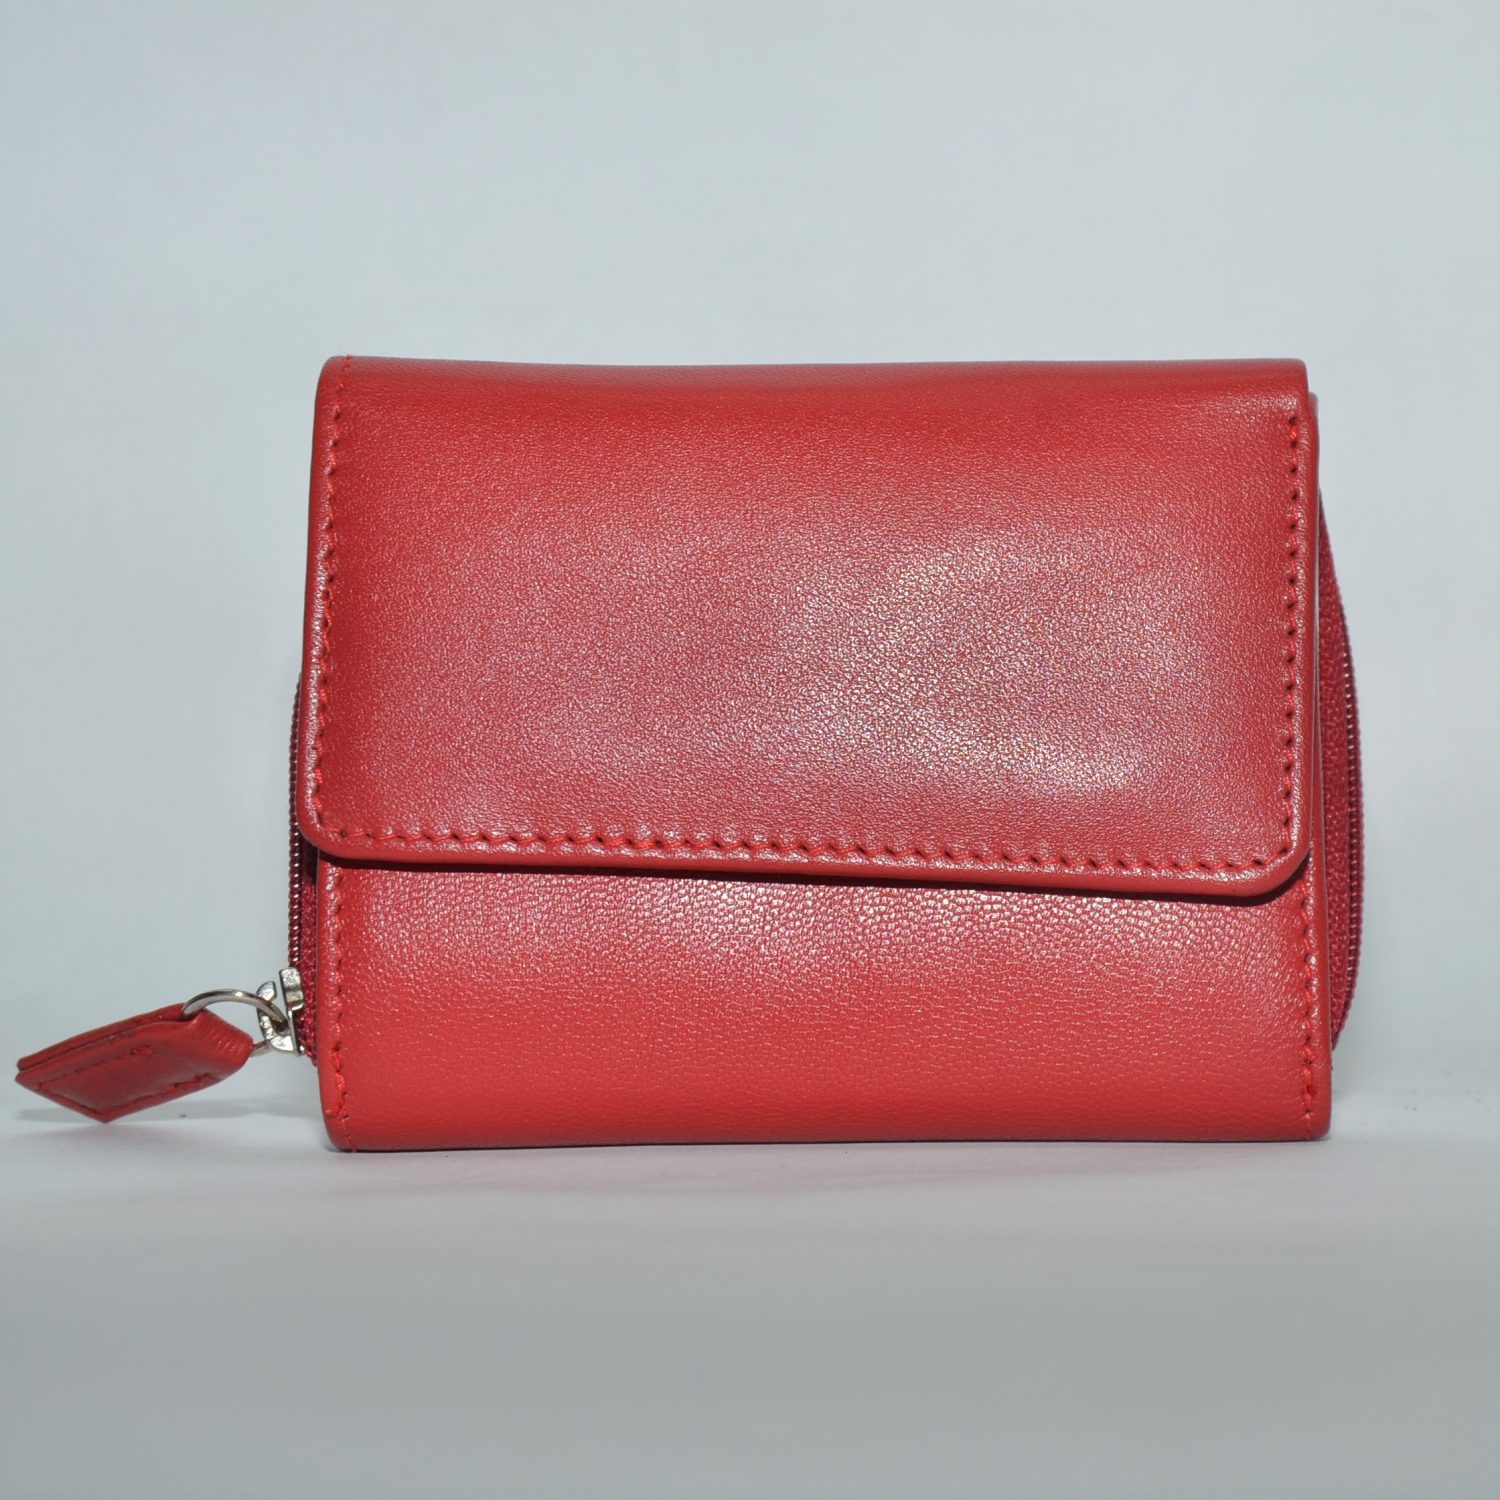 Primehide Leather RFID Purse - Style No. 2814 - OJP Products